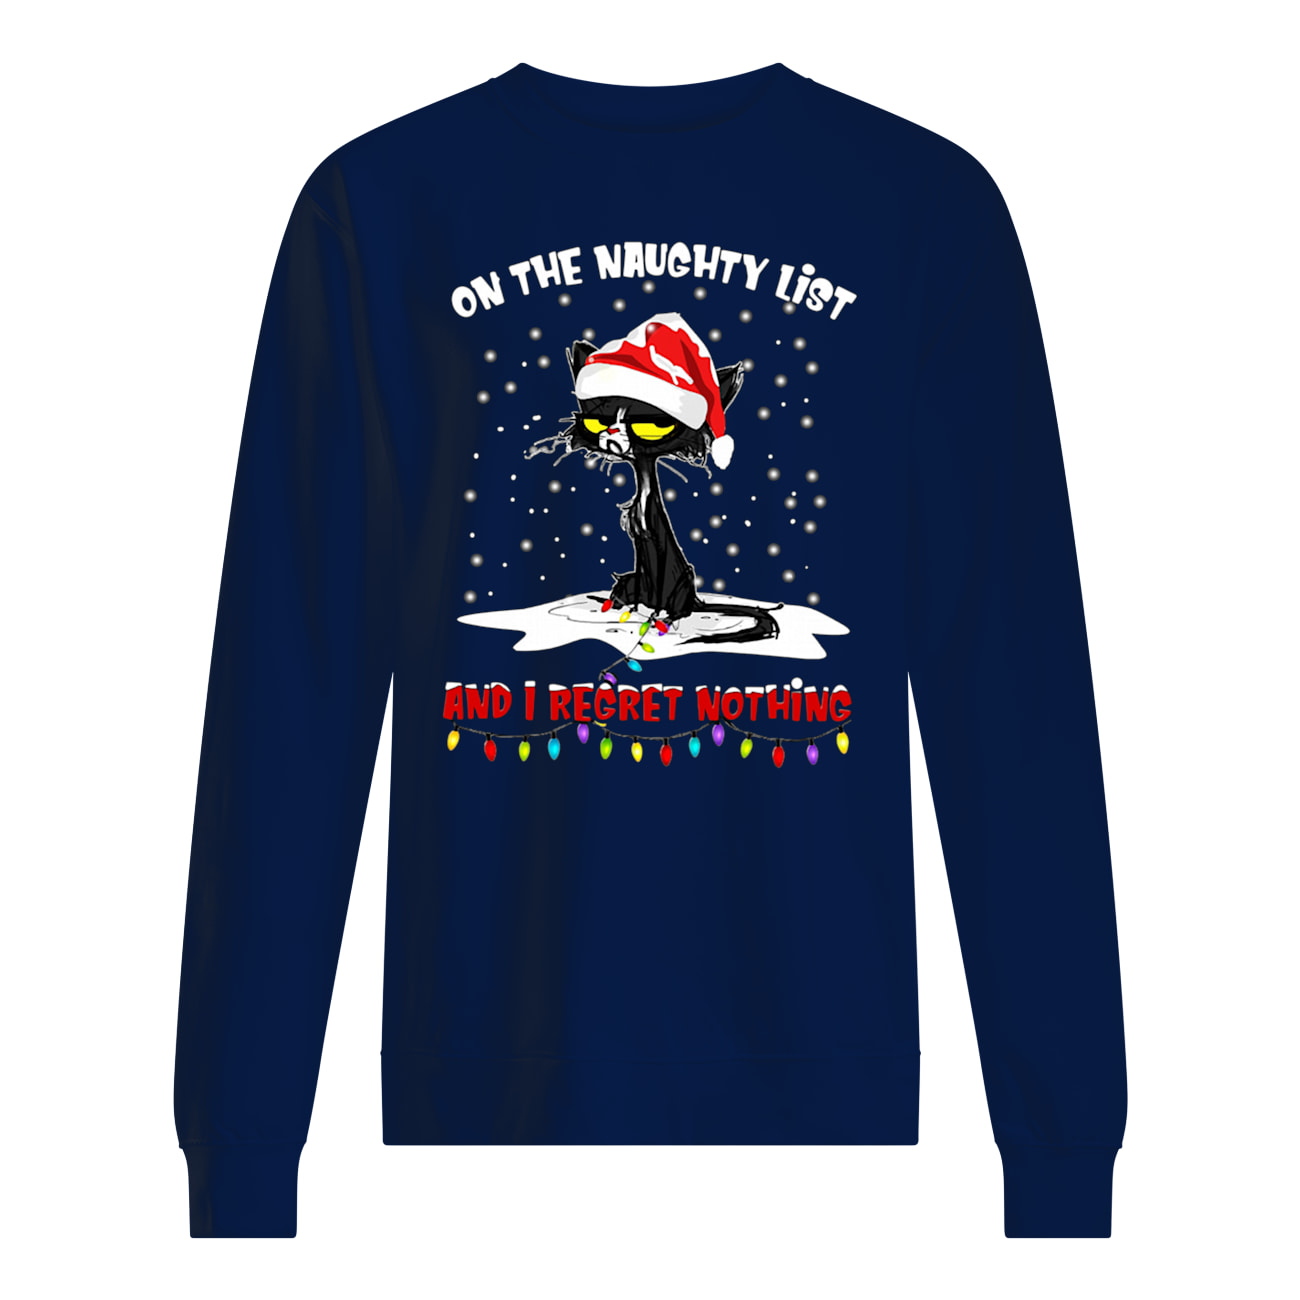 Black cats on the naughty list and i regret nothing christmas sweatshirt